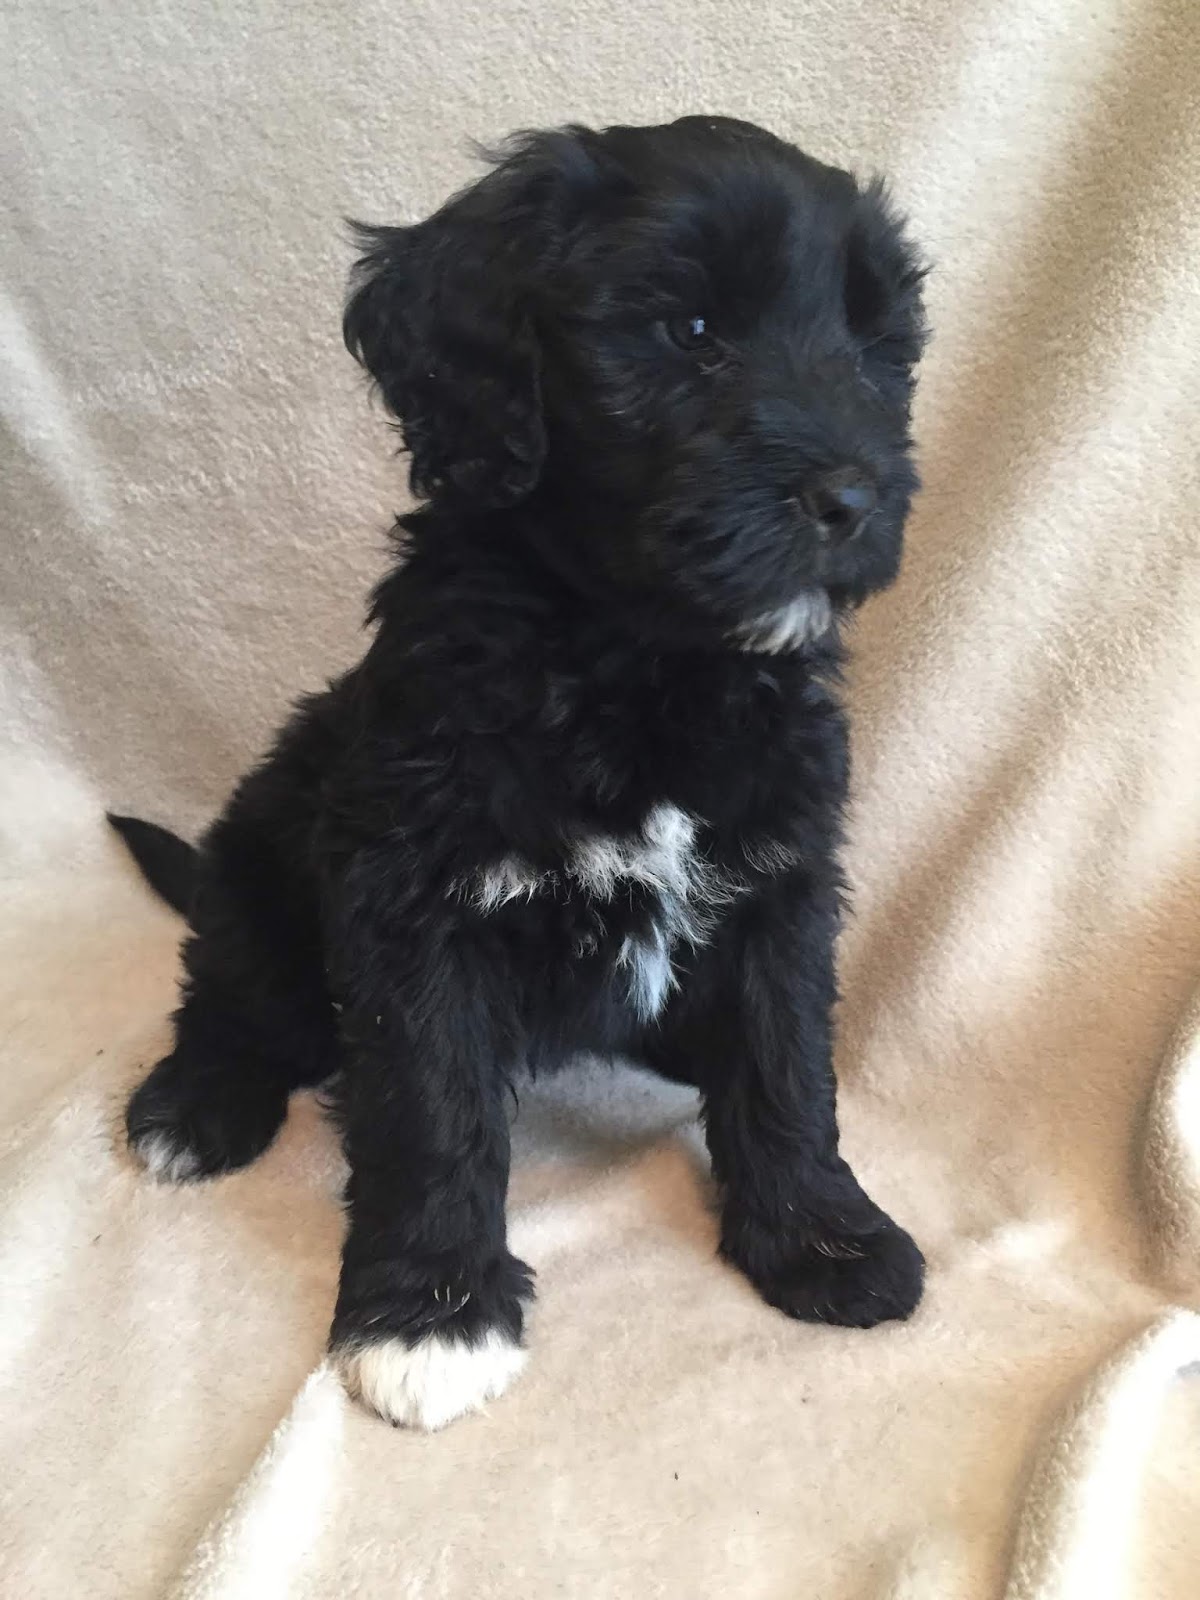 Blue Run Portuguese Water Dogs: The Yuletide 2 litter leave next week